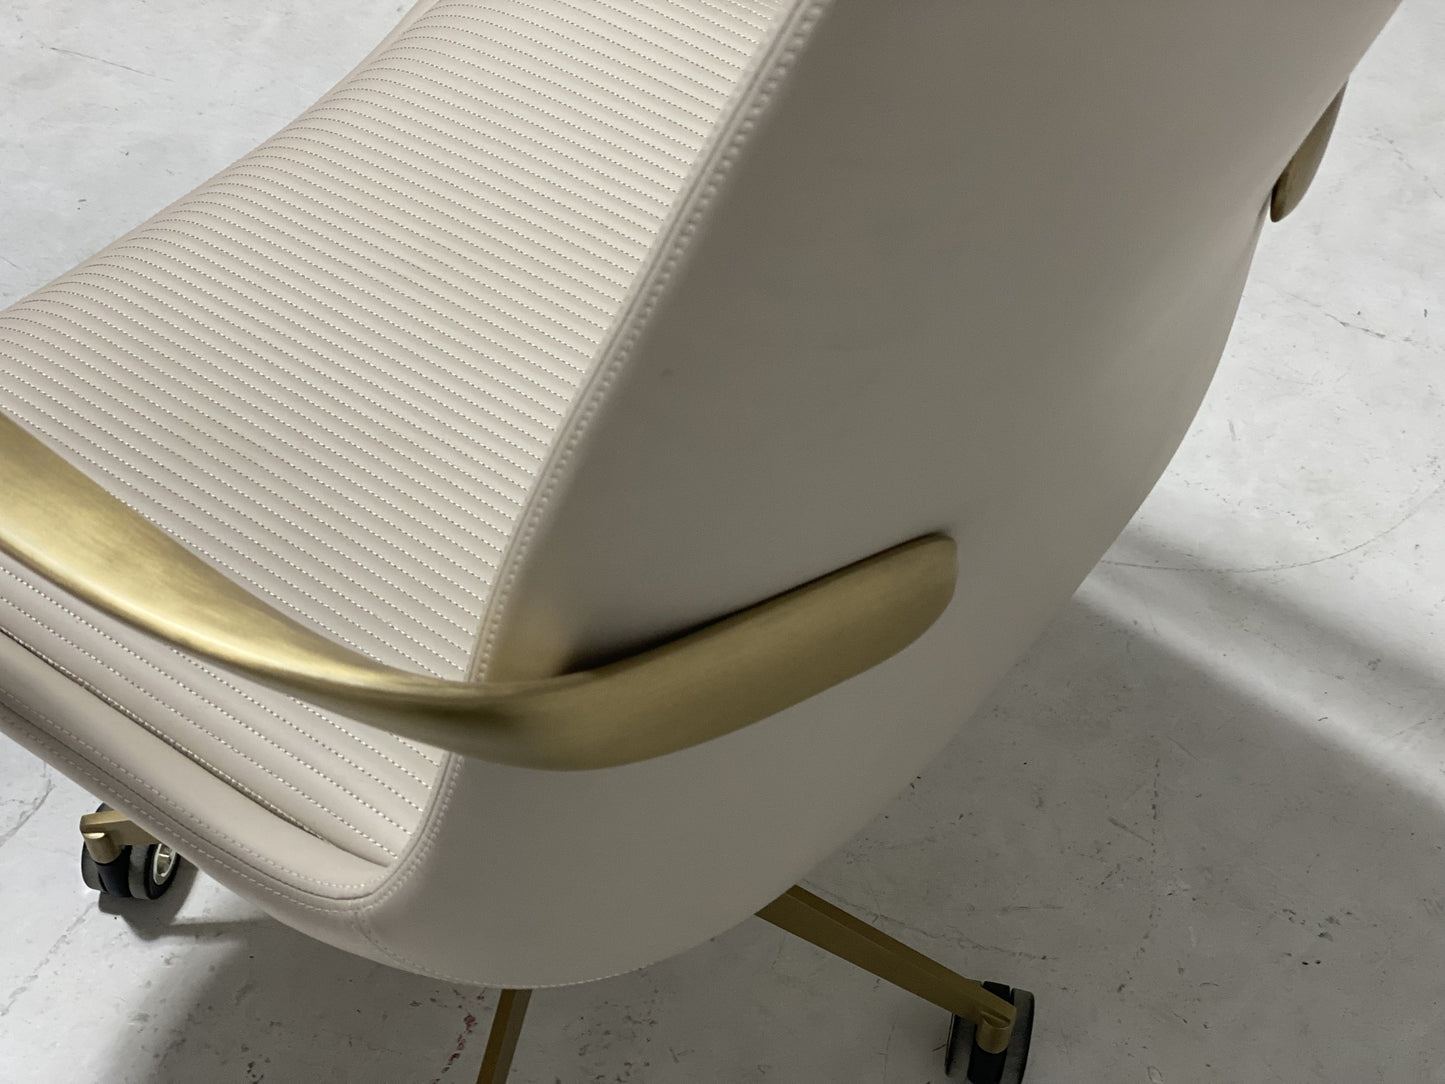 Visionnaire Volver Office Chair